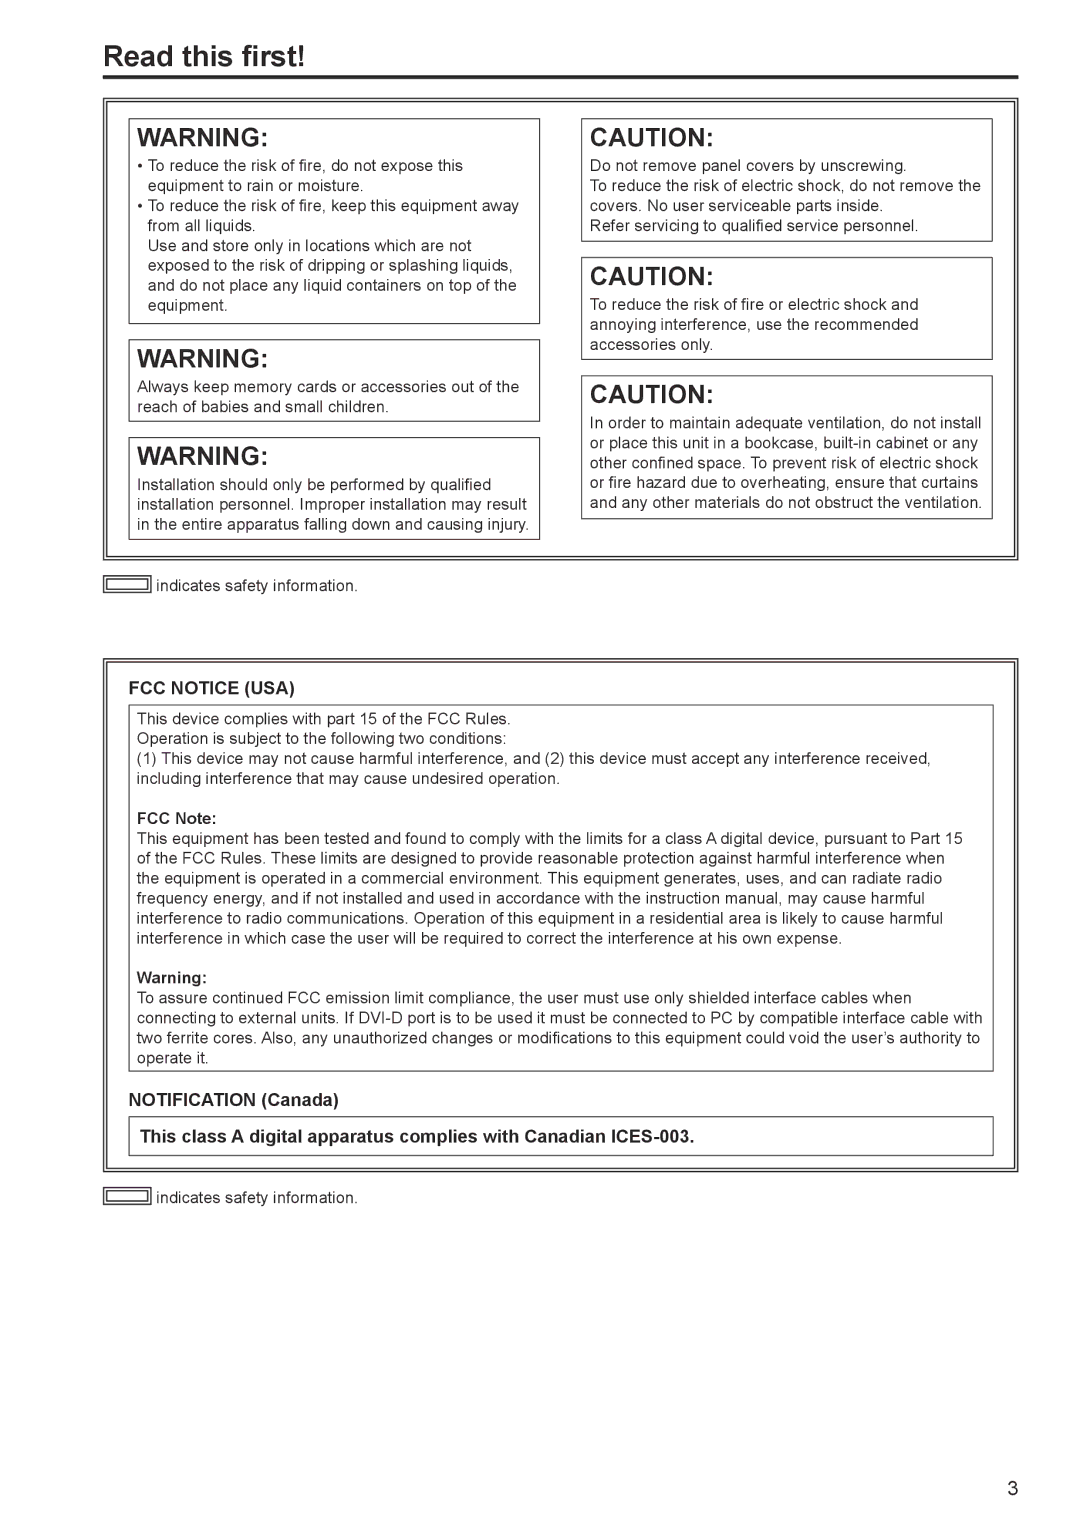 Panasonic AW-RP120G operating instructions Read this first, FCC Note 